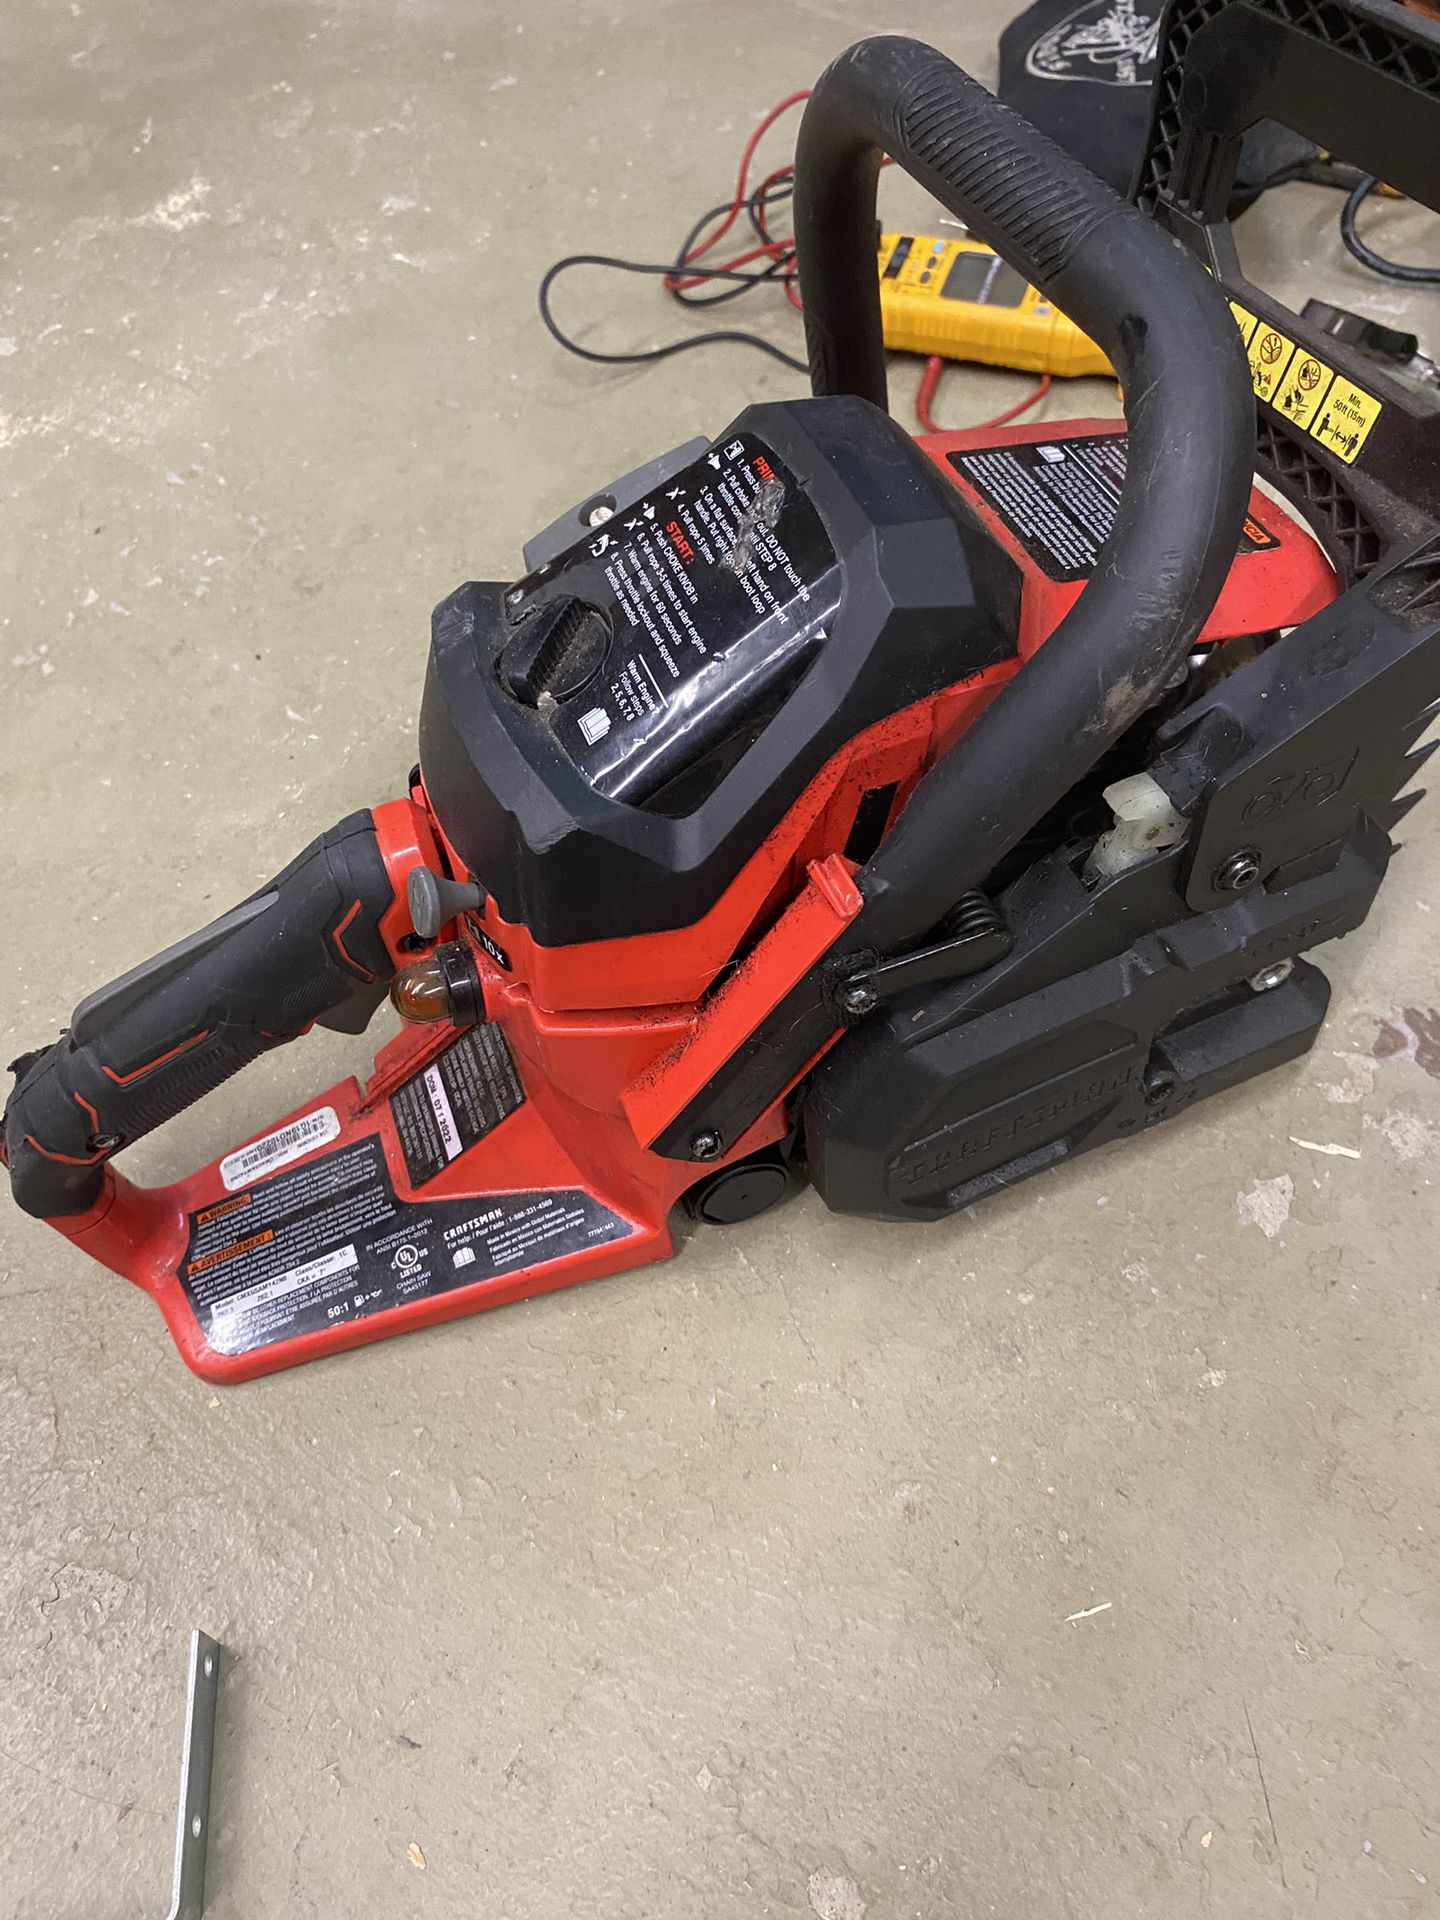 Craftsman S1800 42cc Chainsaw (I Have The Chain But No Bar) Barely Touched